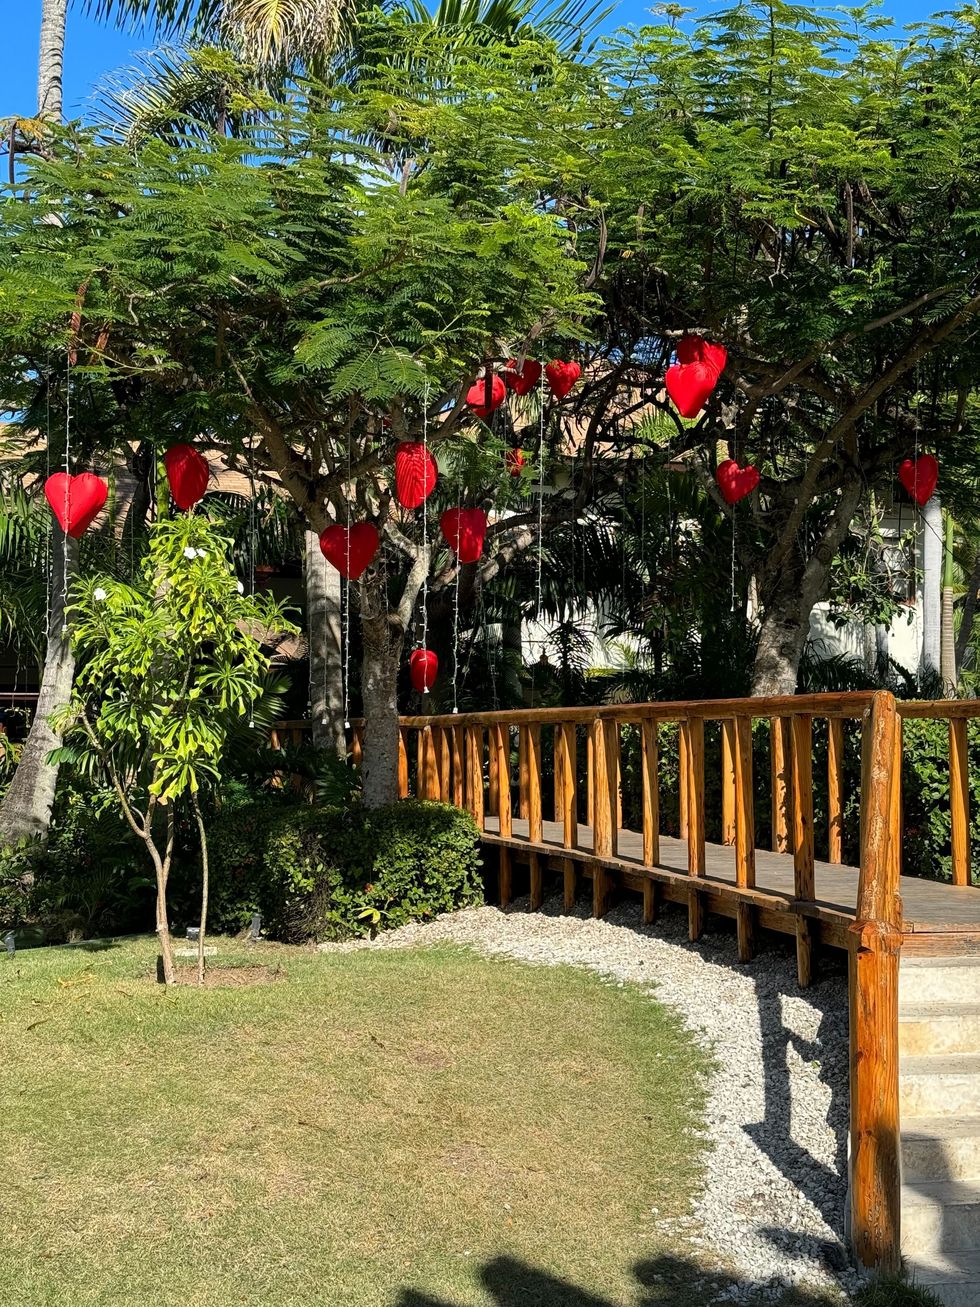 a wooden fence with red lanterns from it